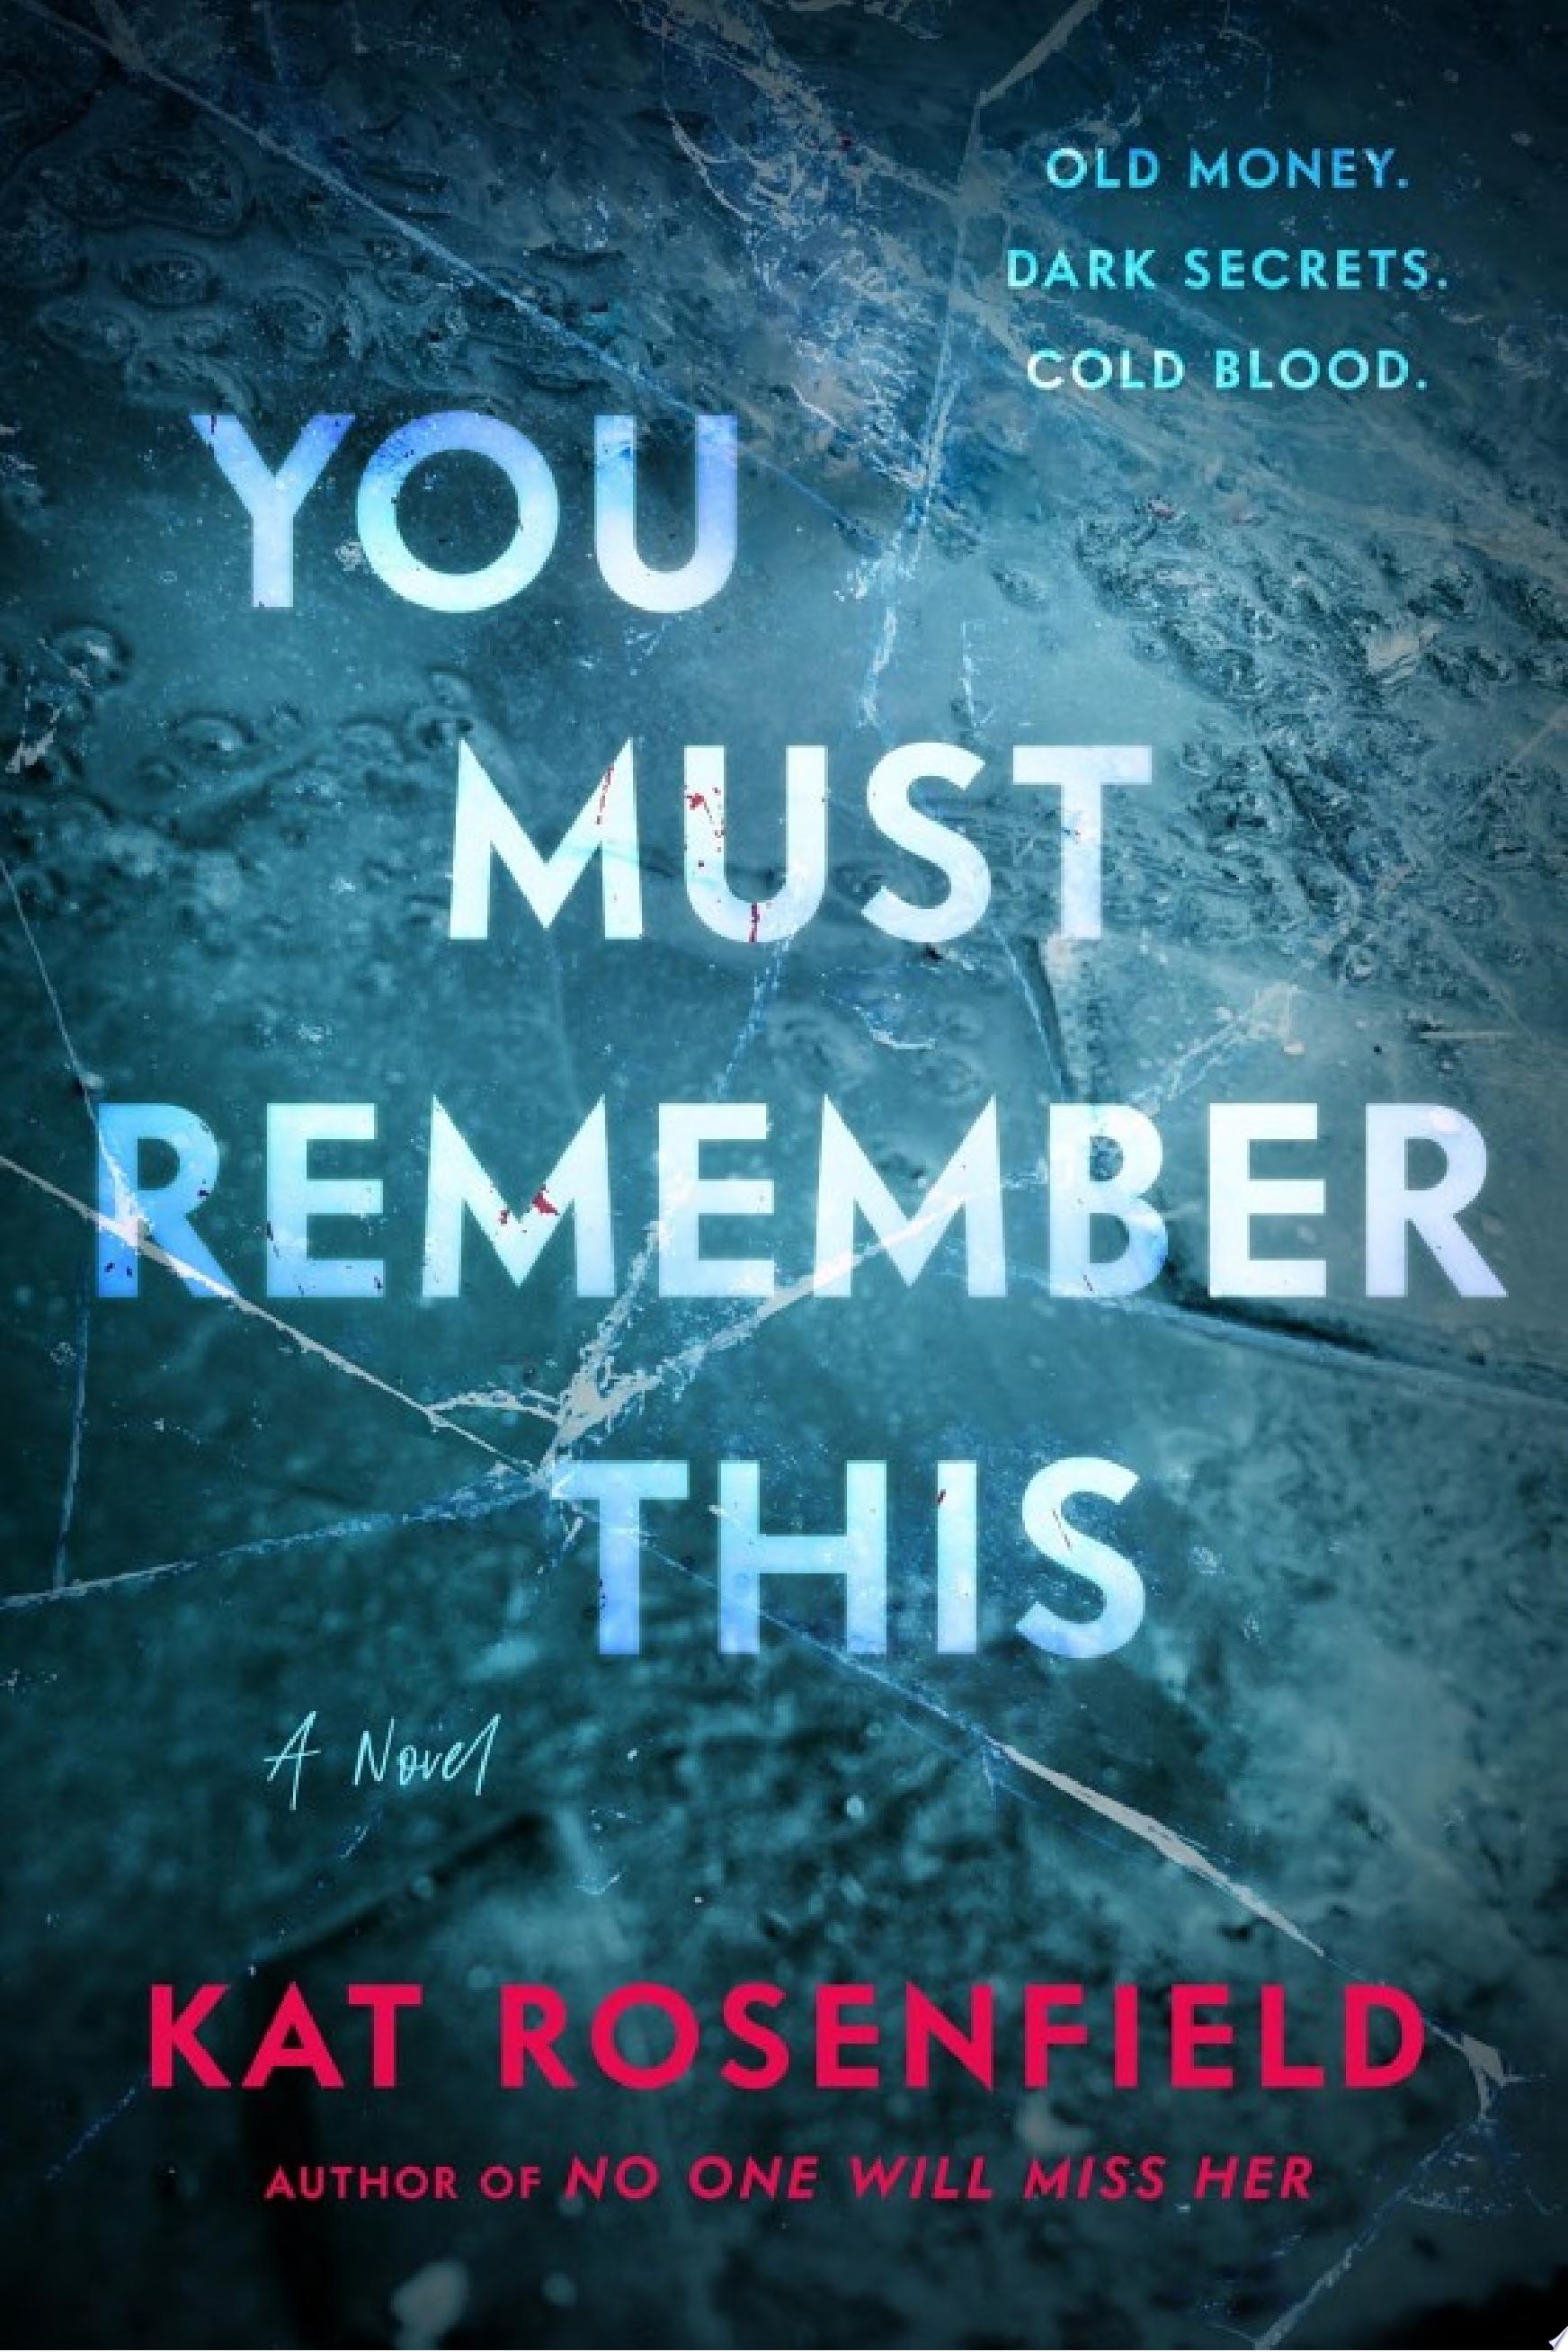 Image for "You Must Remember This"